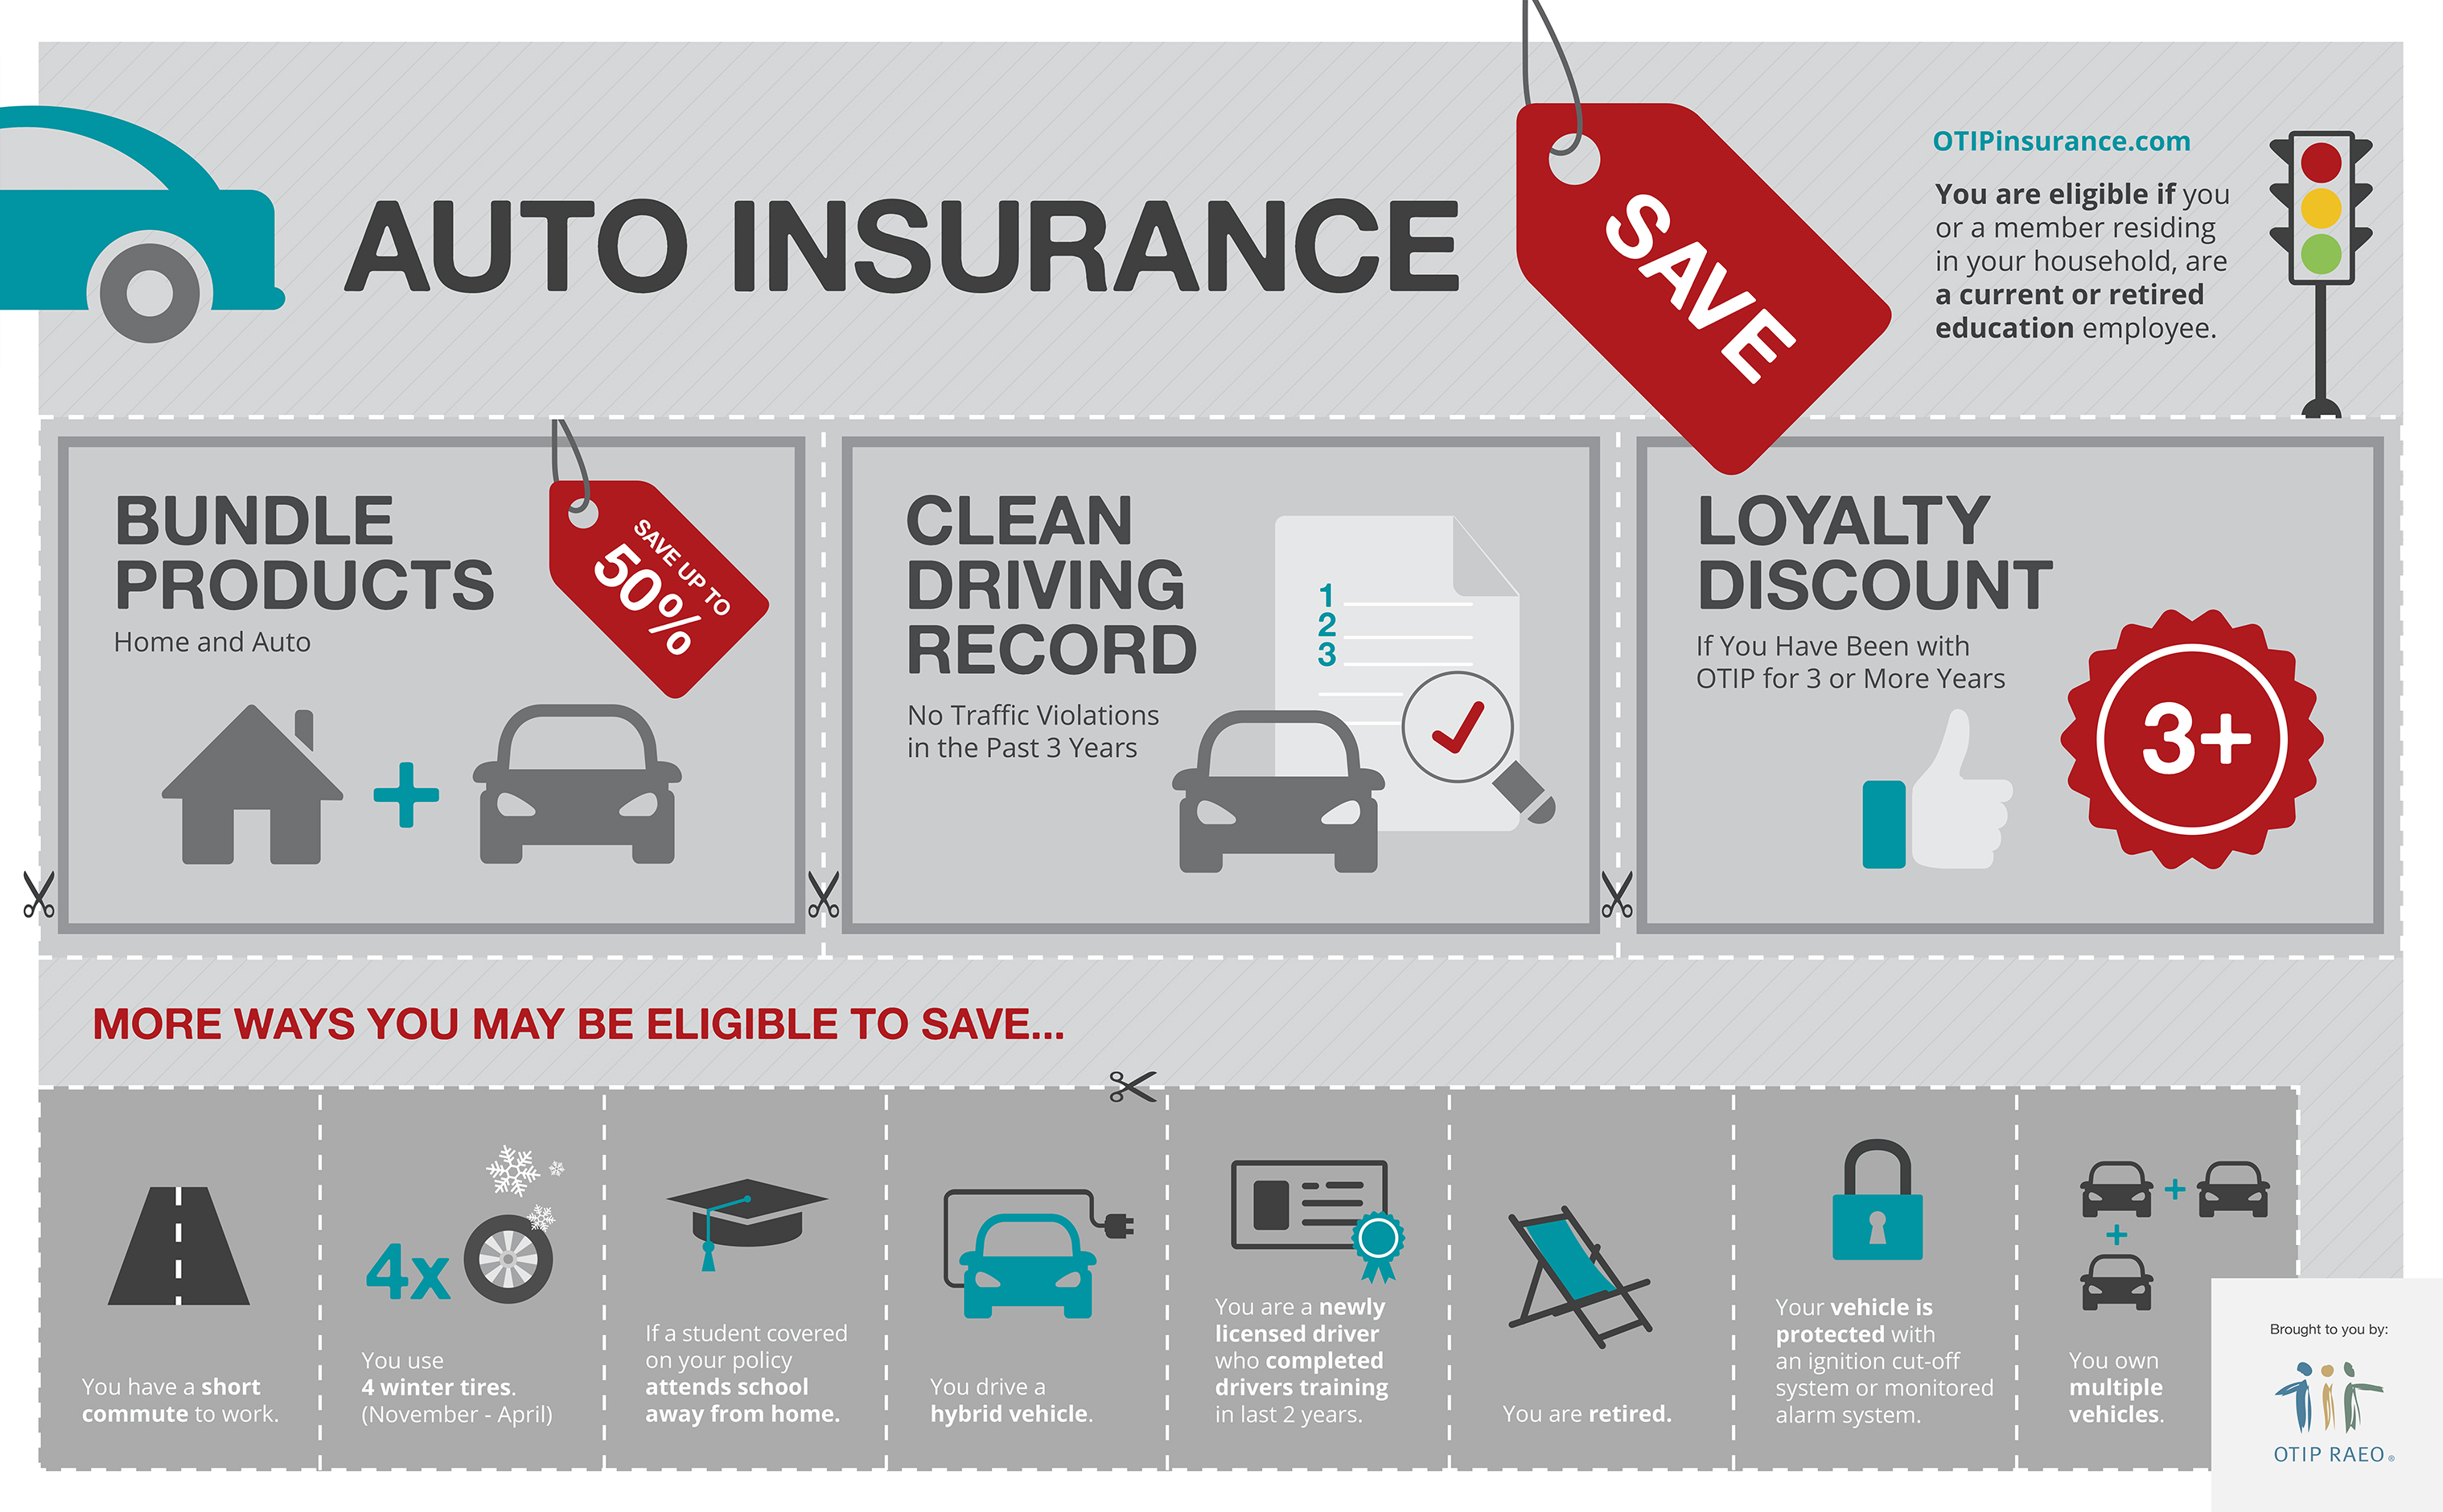 car-and-home-insurance-discounts-otip-insurance